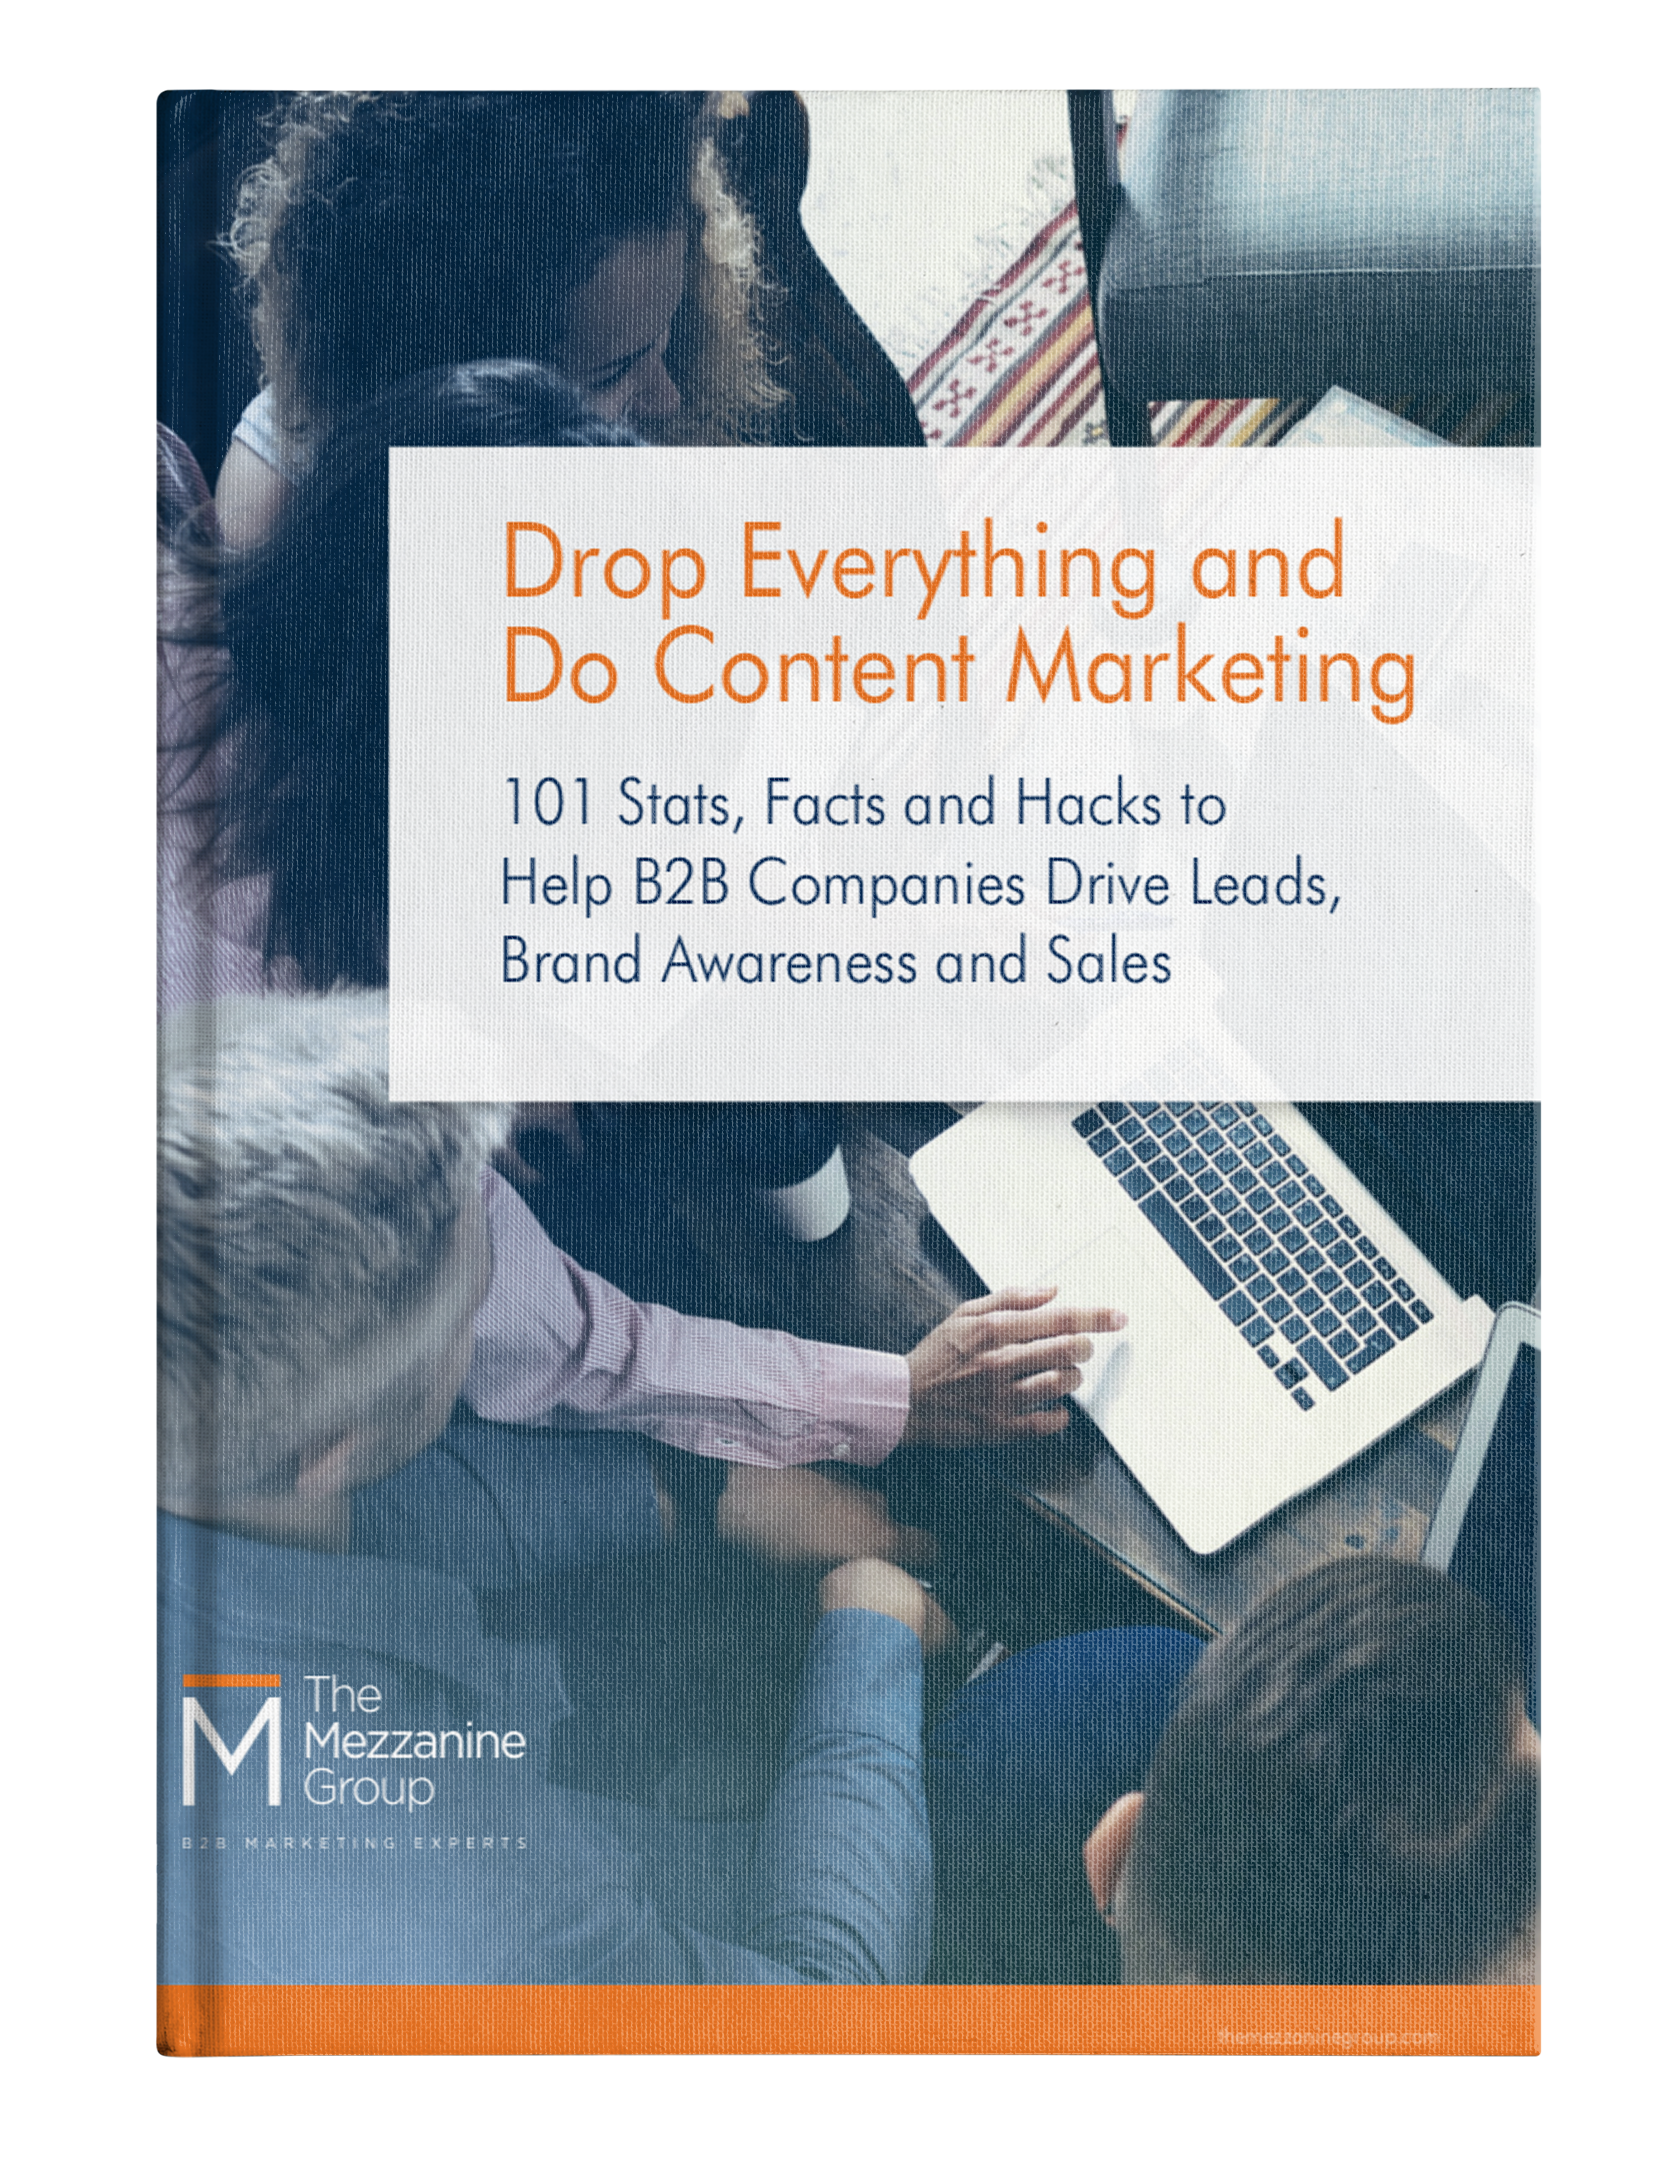 Drop Everything and do content marketing